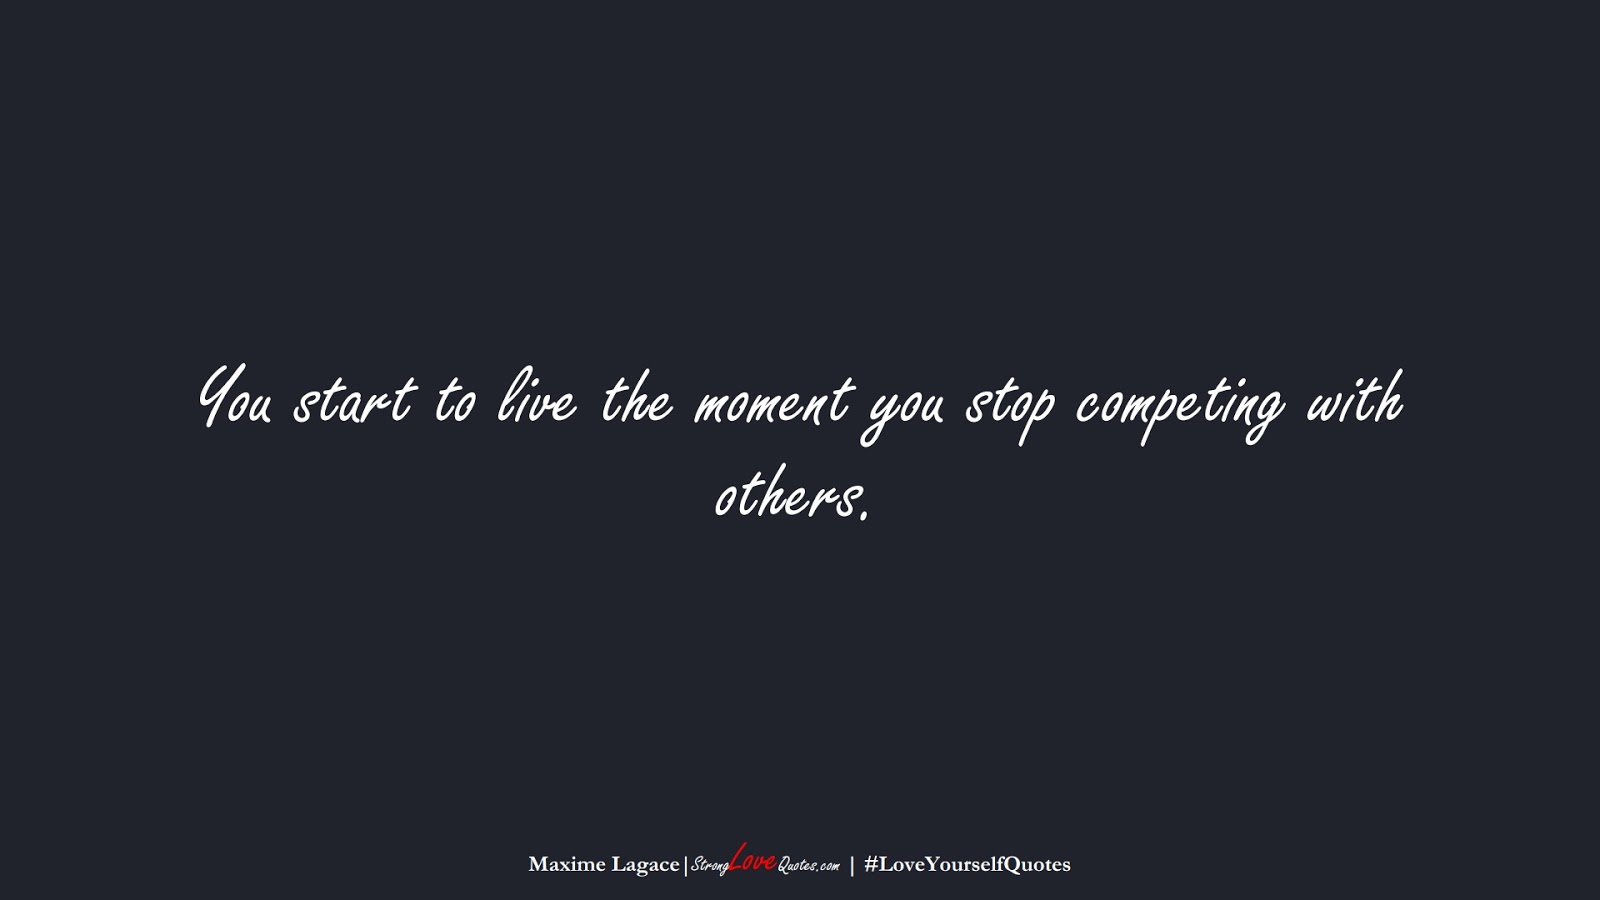 You start to live the moment you stop competing with others. (Maxime Lagace);  #LoveYourselfQuotes